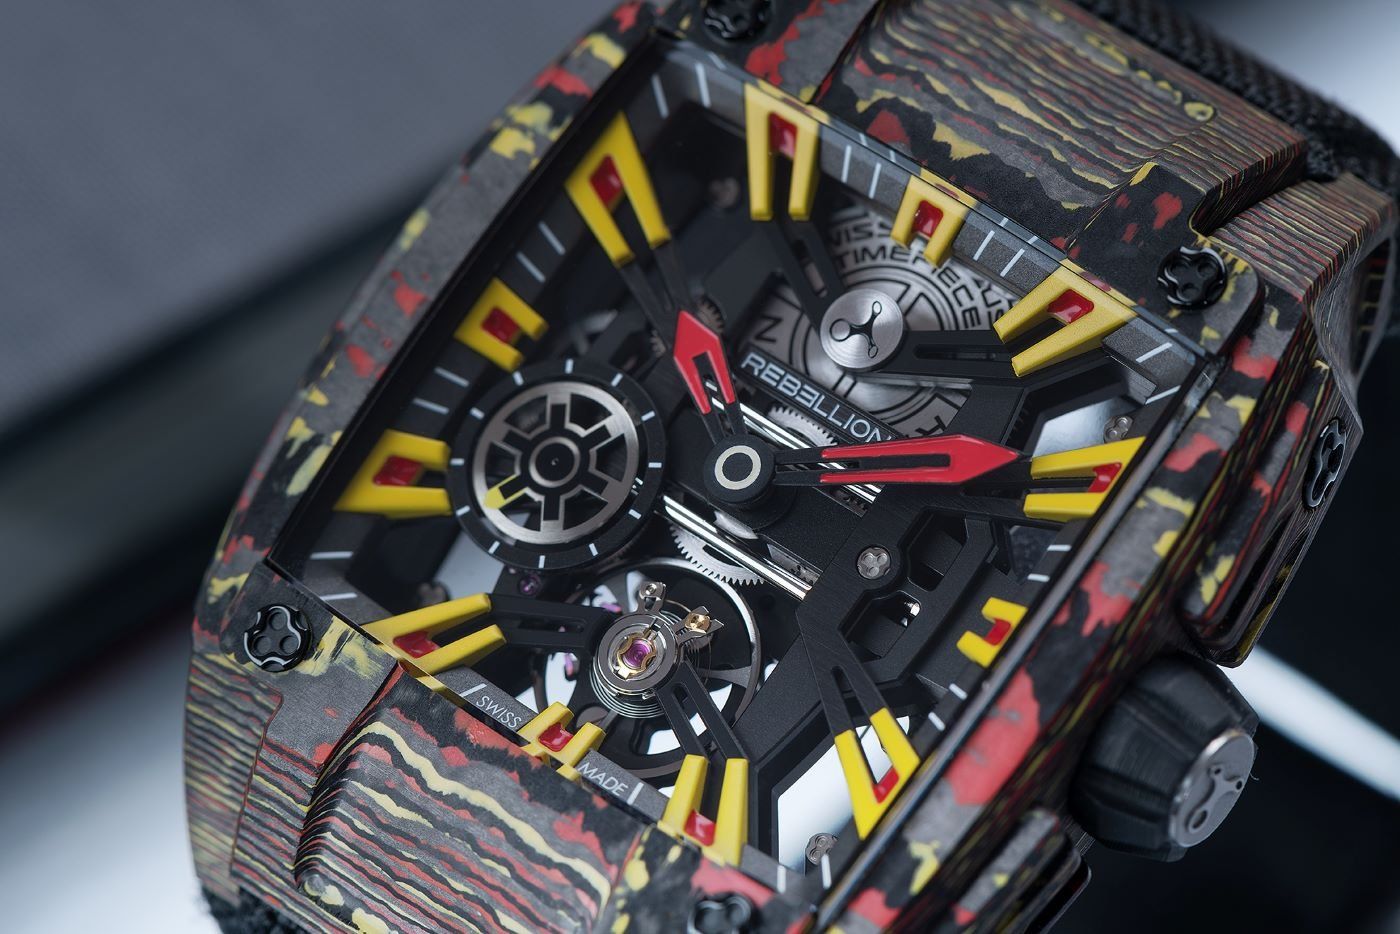 The face of the Re-Volt features an open-worked design that focused on the manufacture's caliber